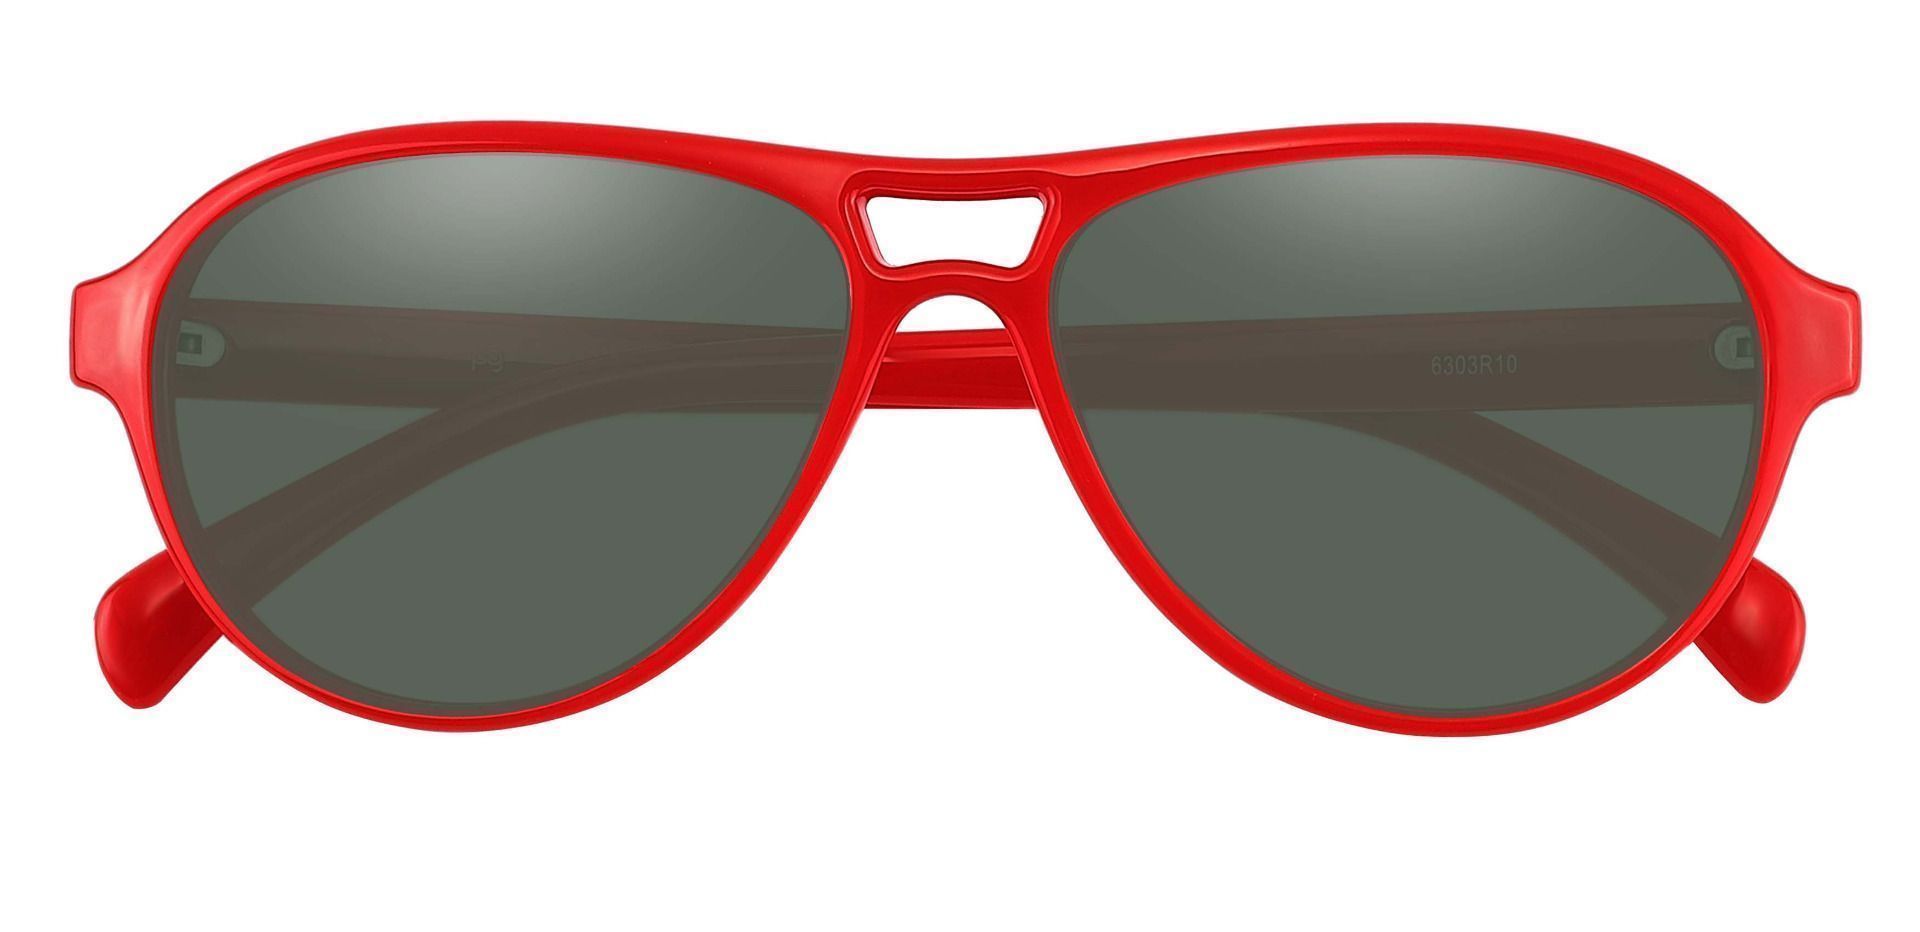 Sosa Aviator Non-Rx Sunglasses - Red Frame With Green Lenses